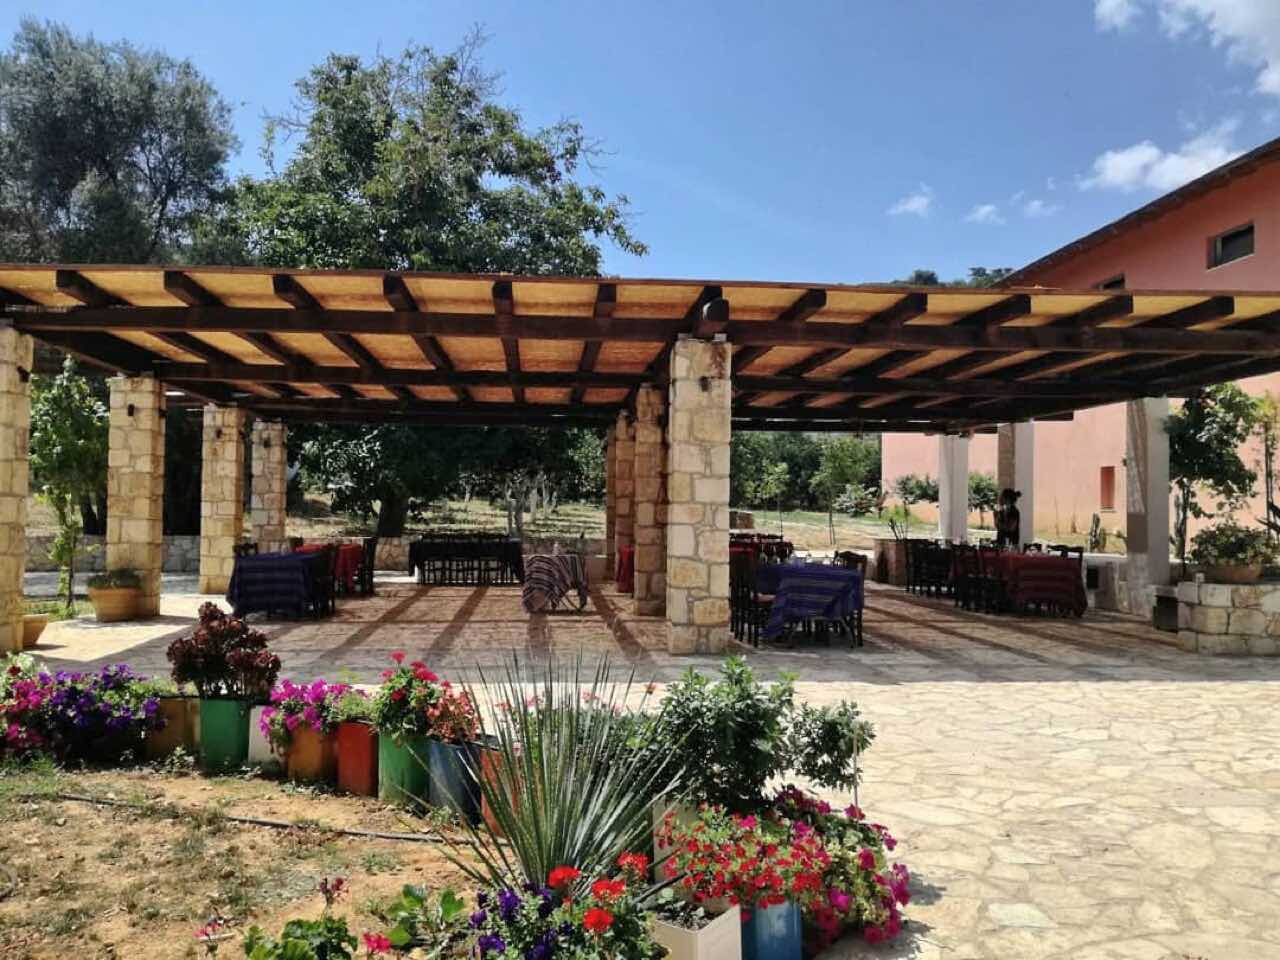 winery tours, wine tasting manousakis winery chania crete, winery visit manousakis winery, bio organic wine chania crete, vineyard tours, bio wine food tasting chania crete, best organic winey crete greece, Organic, boutique winery handcrafted wine, nostos wines chania crete